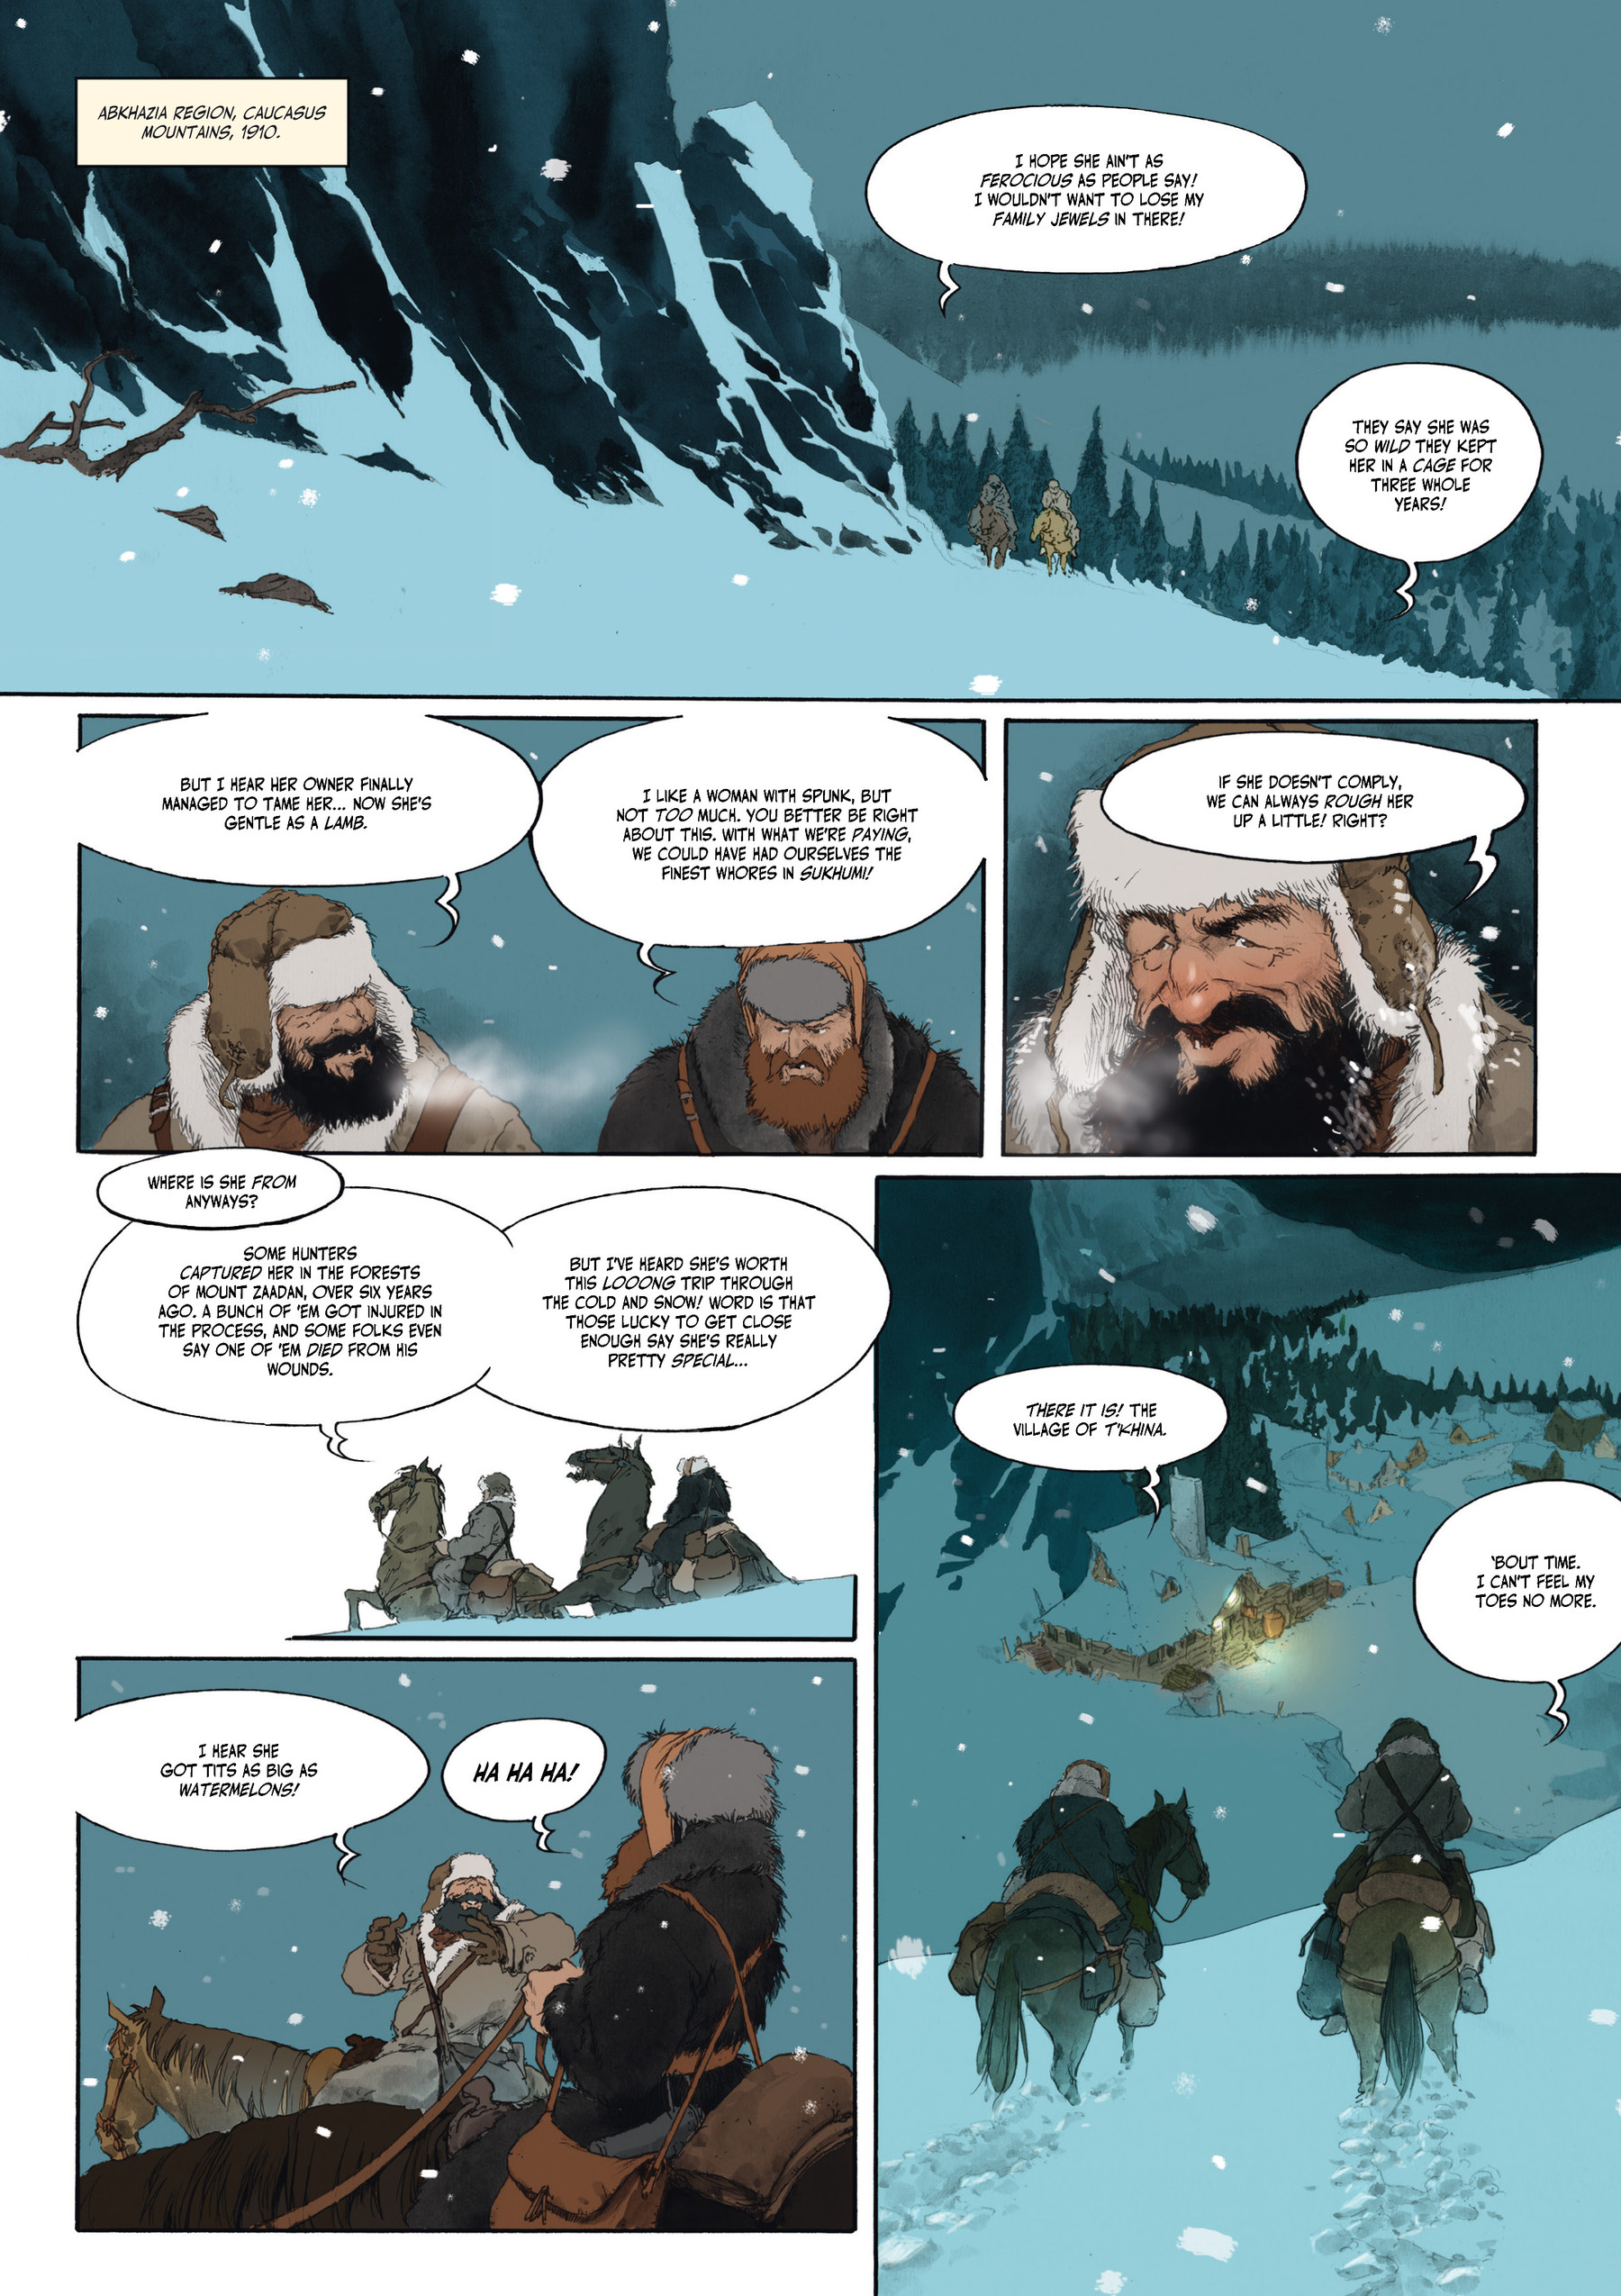 Carthago Adventures (2017-): Chapter vol1 - Page 5